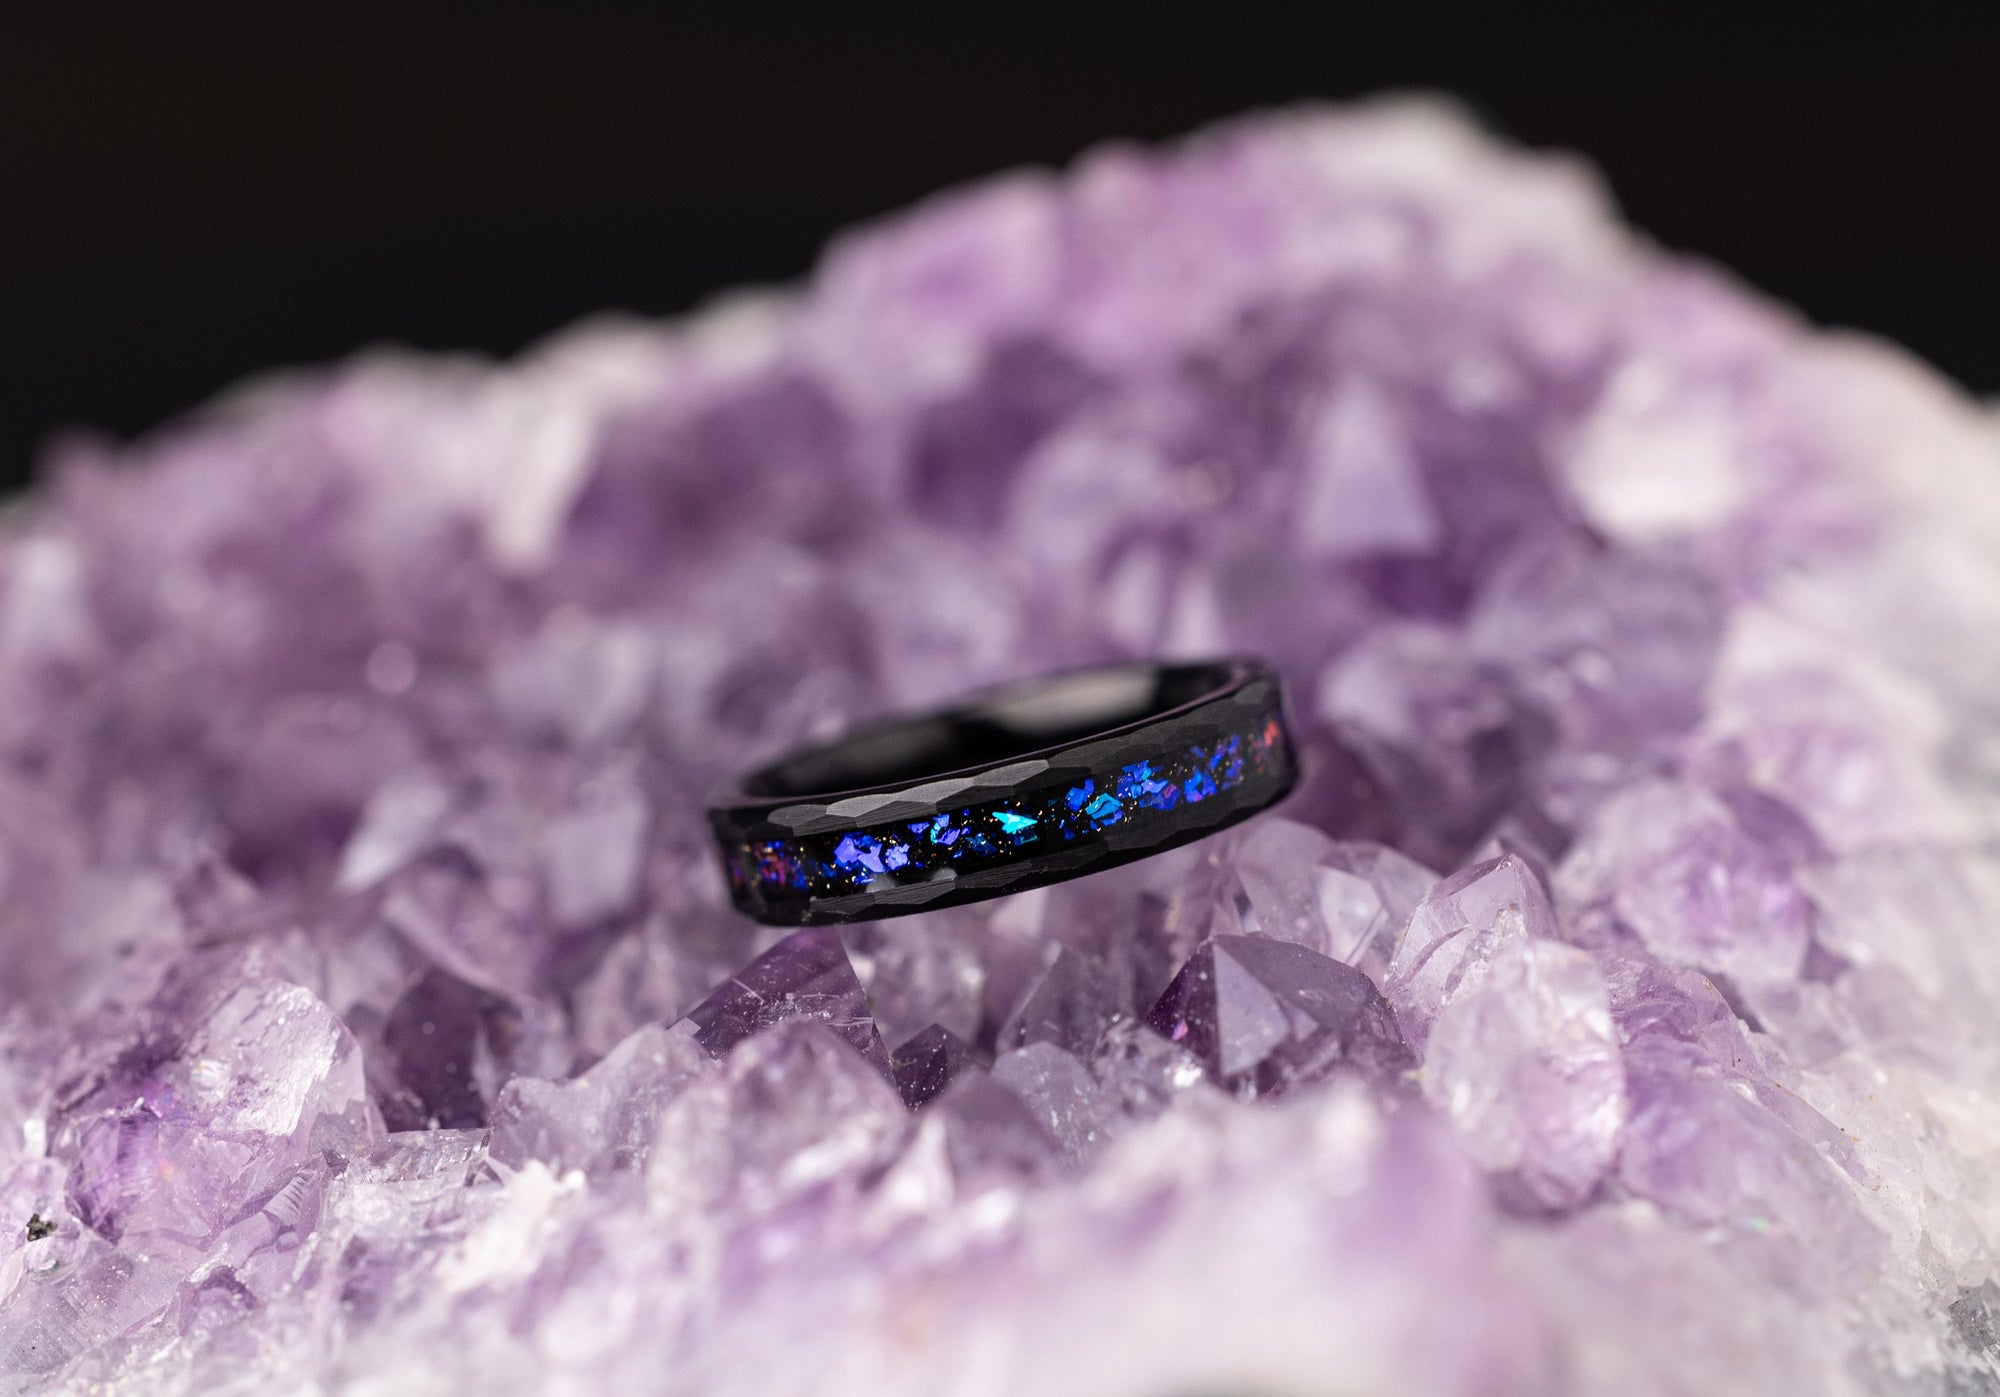 Space Galaxy Ring, Nebula Hammered Ring, Hammered Women's Ring, Black Opal and Blue Sandstone Ring, Nebula Space Ring for Women, 4mm